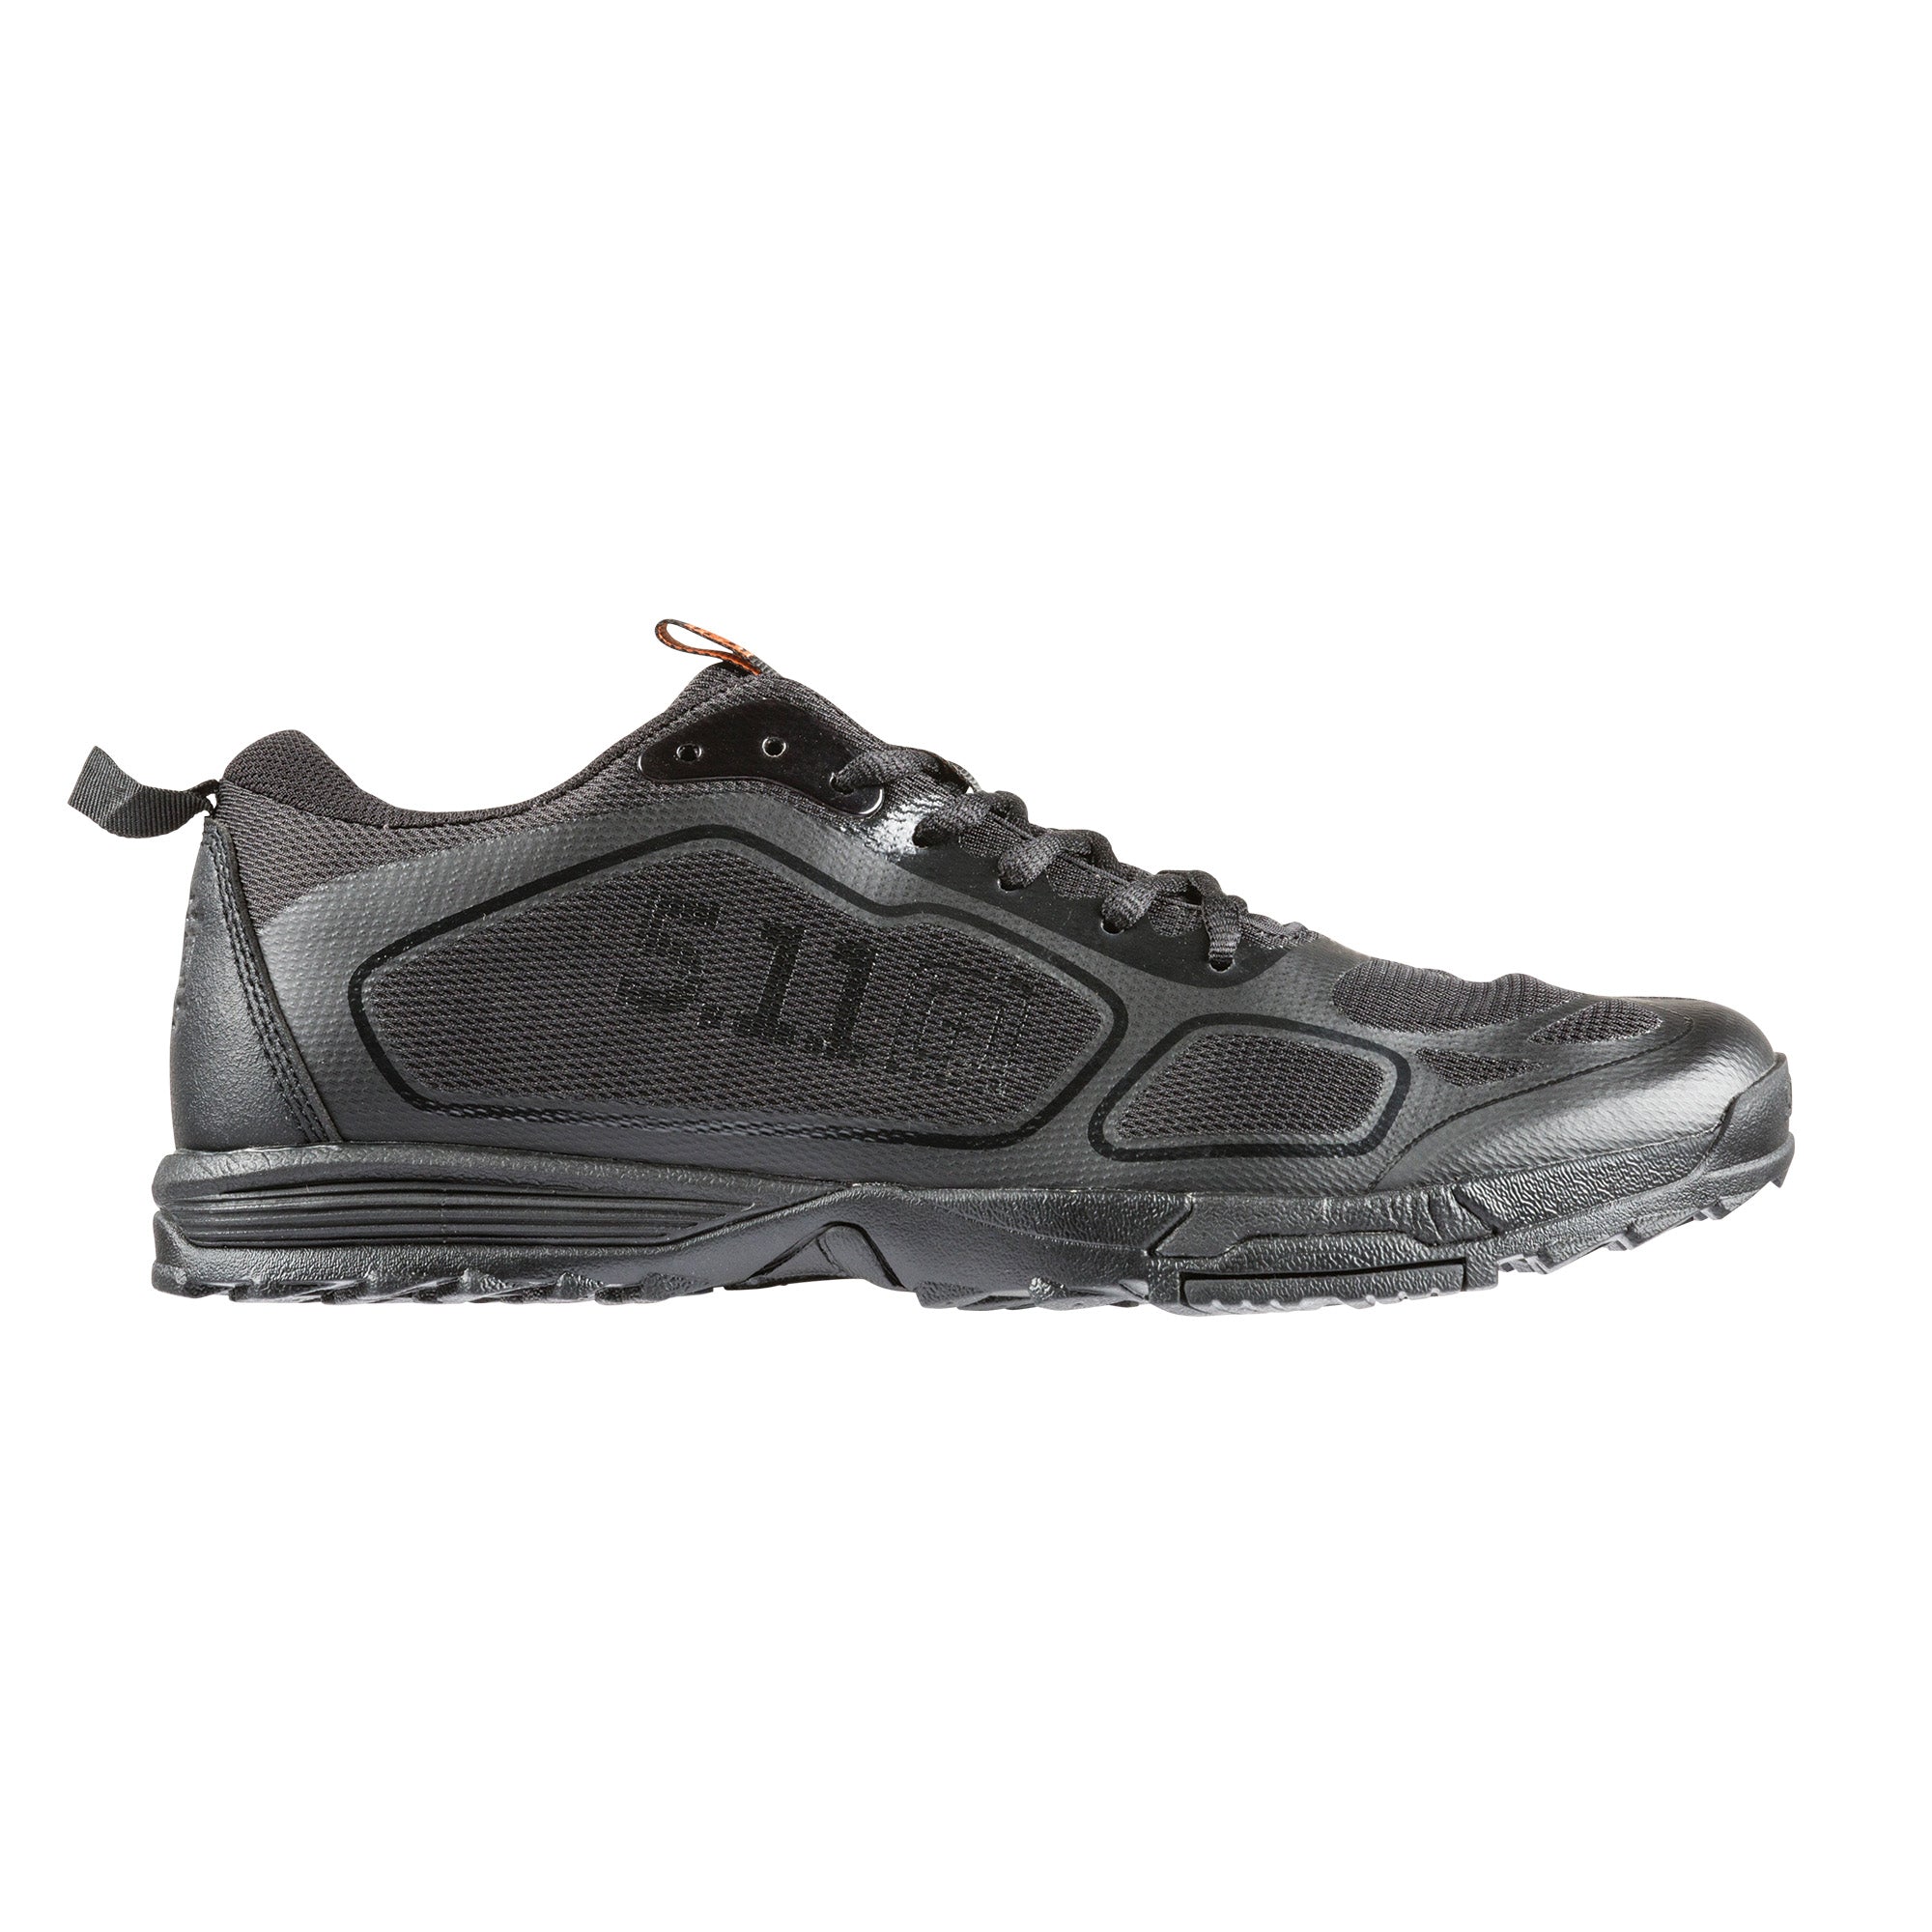 ABR Trainer – 5.11 Tactical Japan